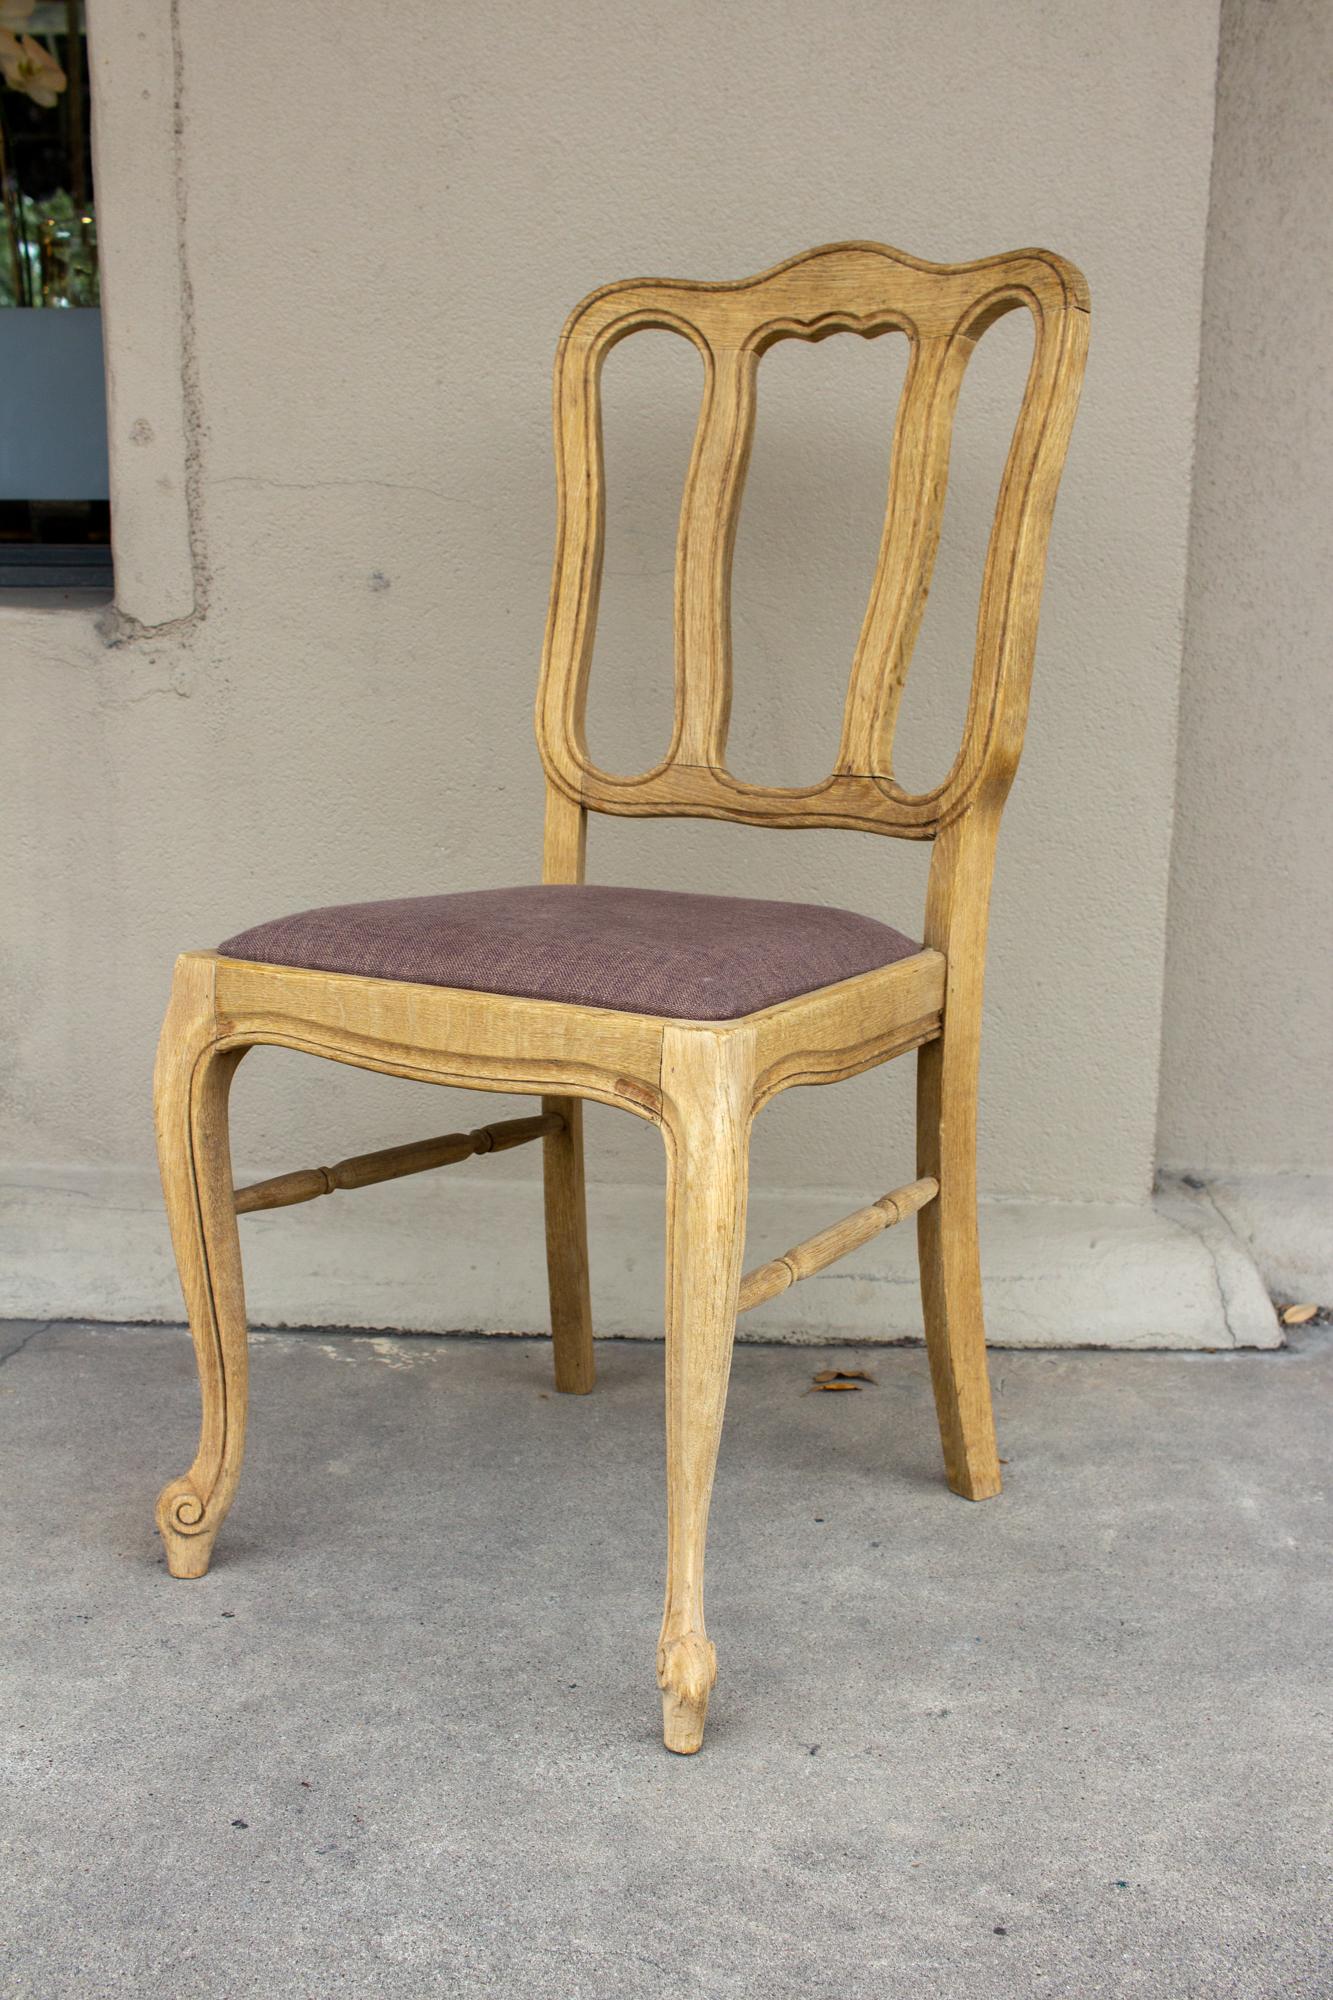 A wonderful set of six French Oak dining chairs with linen seats-- sourced in France, these chairs have been stripped of their original finish, allowing the details of the carving to be revealed. 

Each chair measures 18